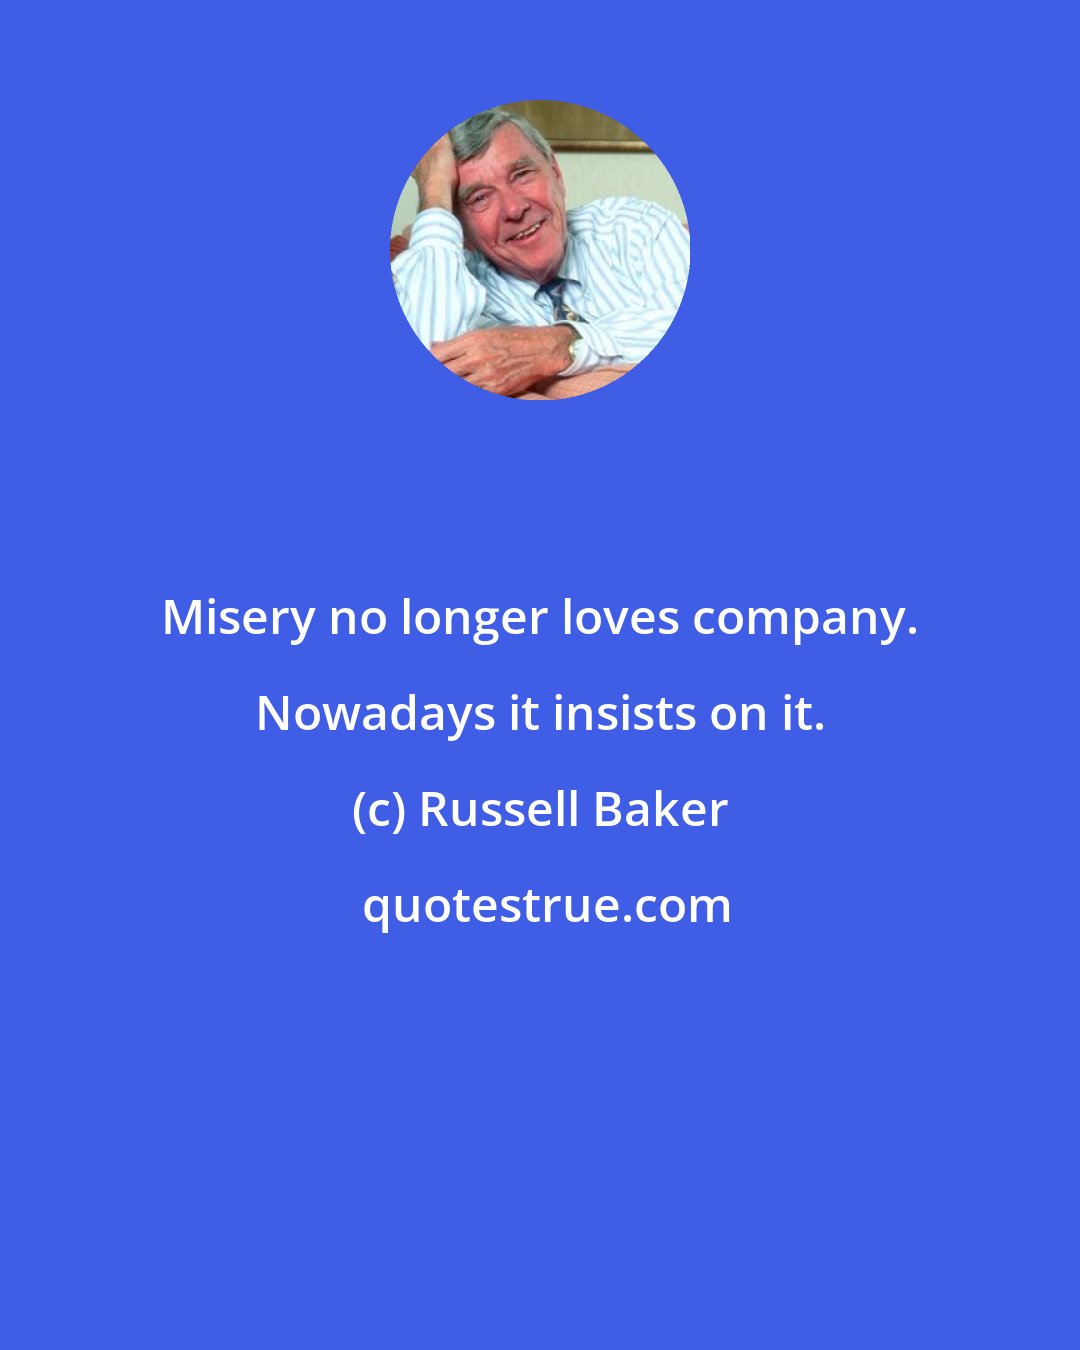 Russell Baker: Misery no longer loves company. Nowadays it insists on it.